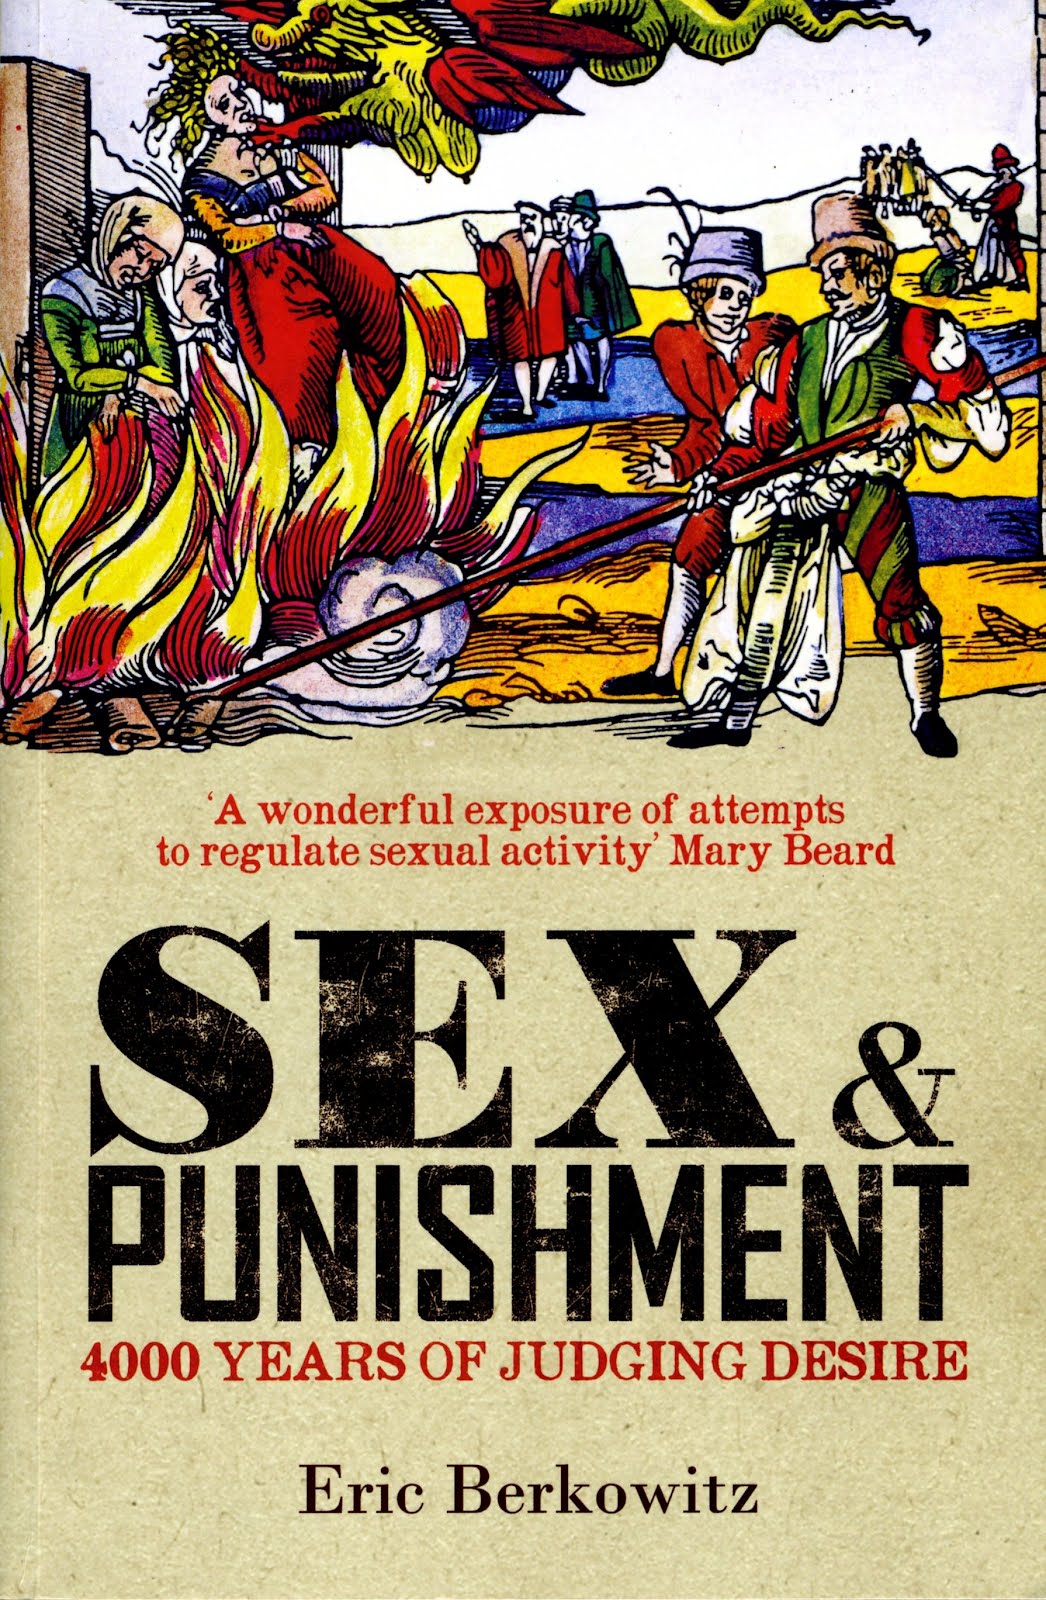 the tanjara review of Sex and Punishment by Eric Berkowitz (The Westbourne Press)